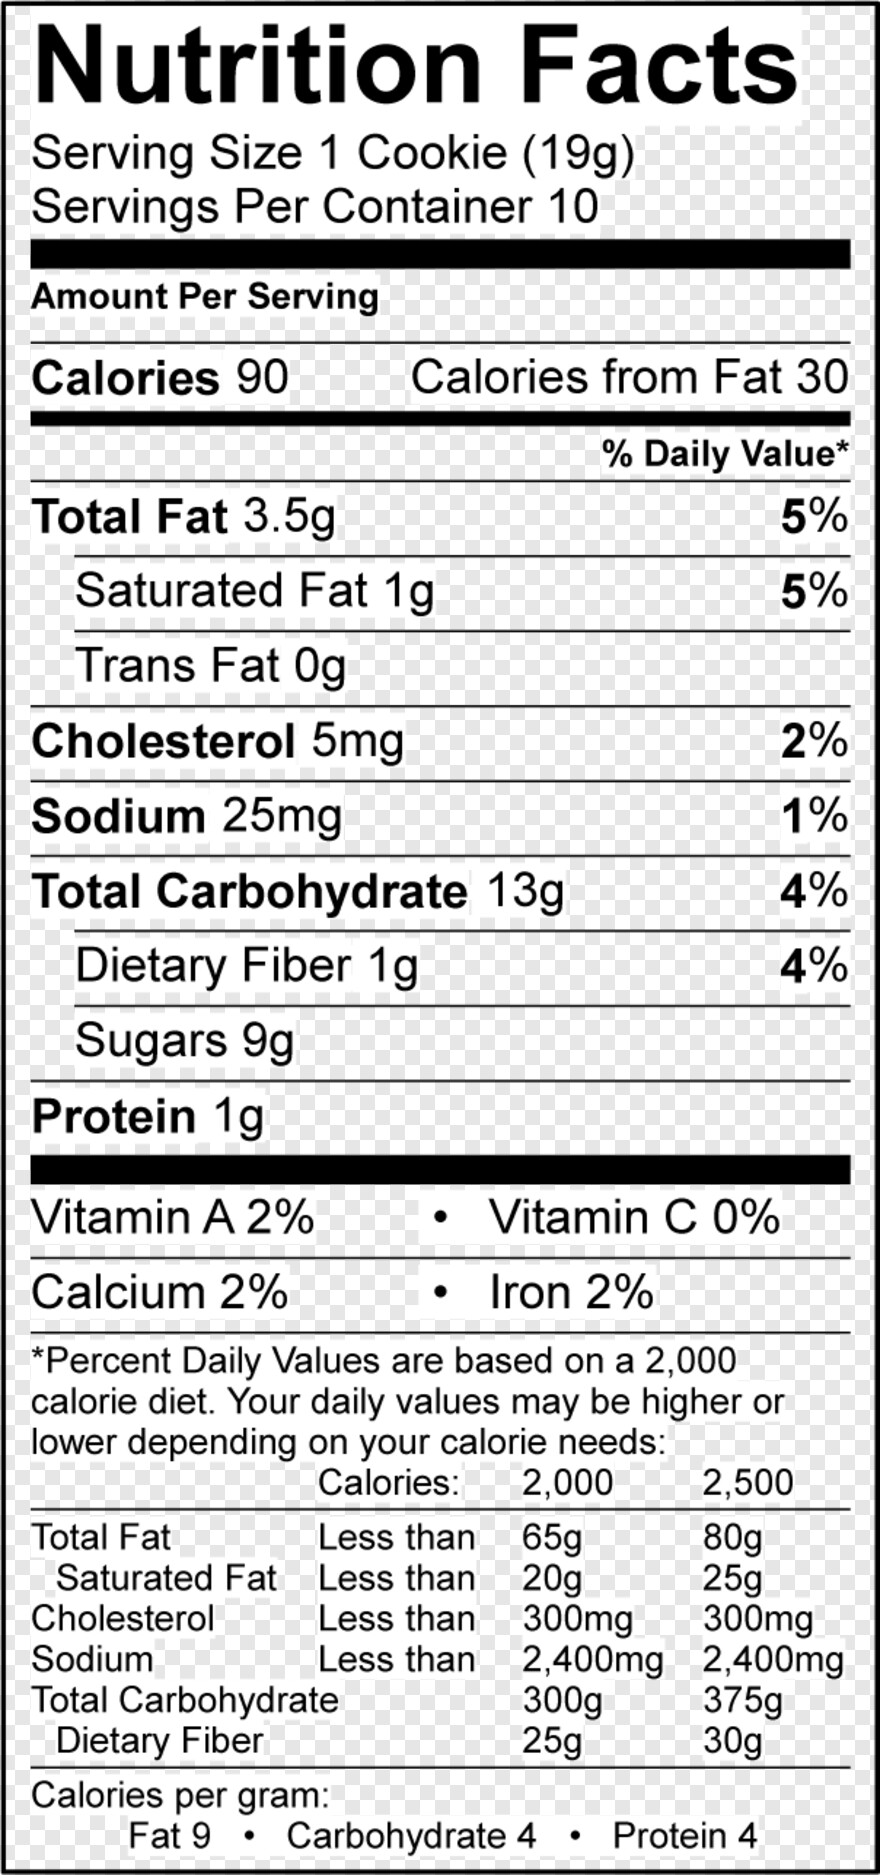 nutrition-facts # 990426